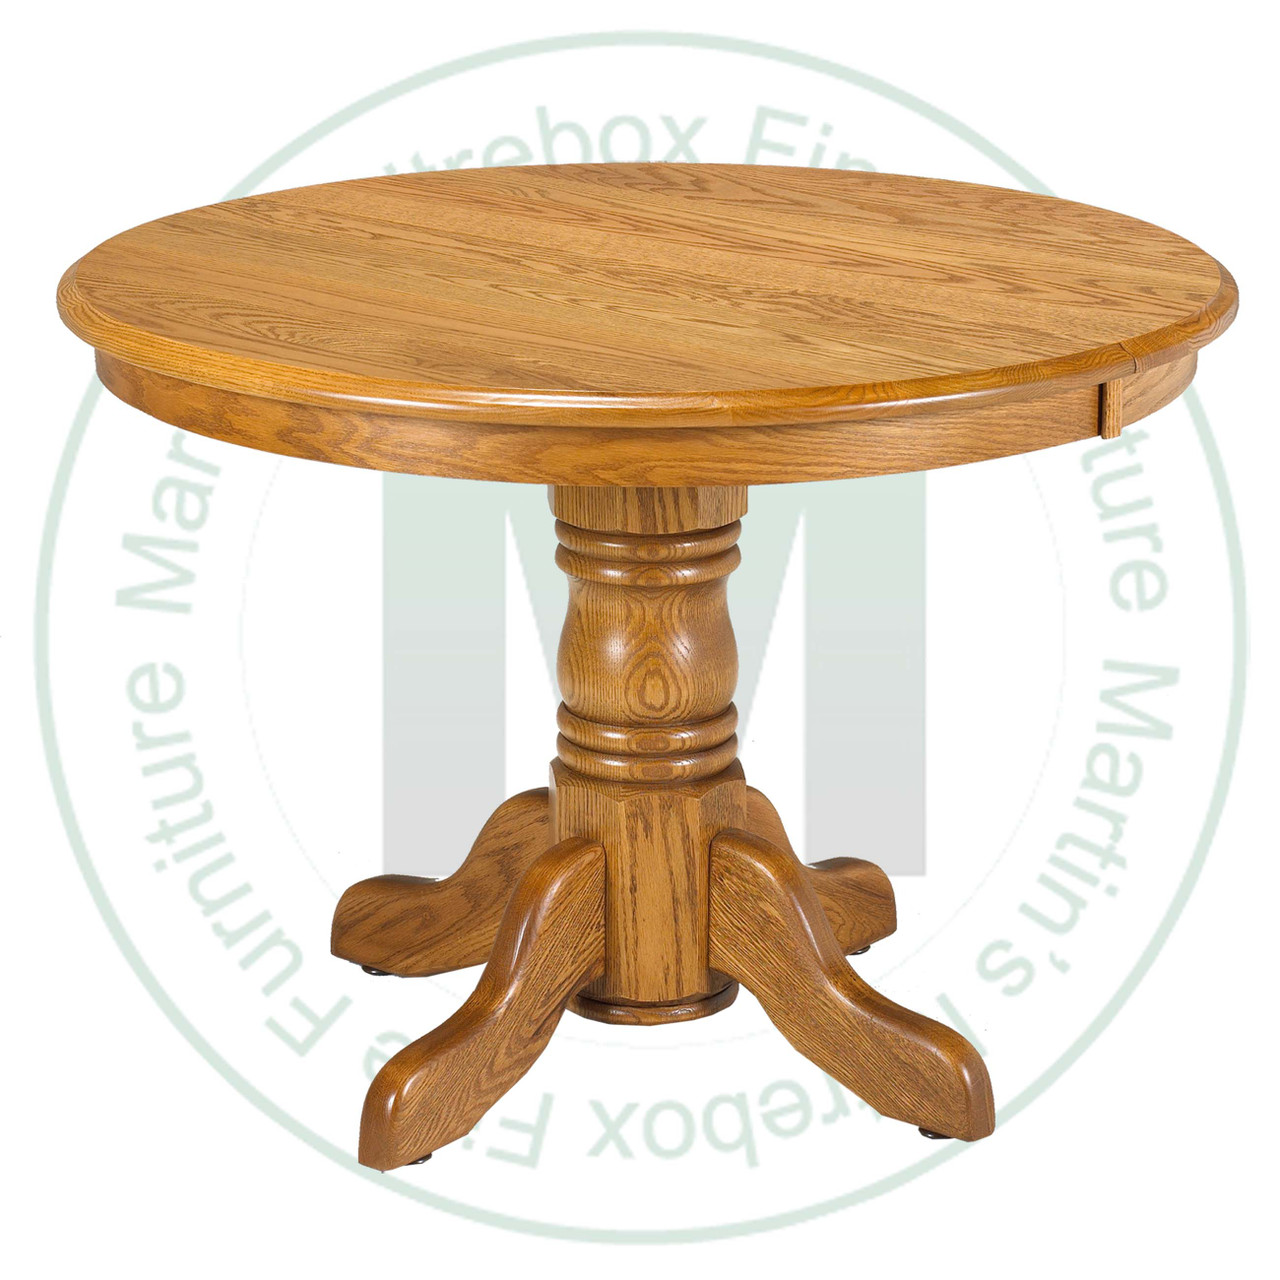 Wormy Maple Lancaster Collection Single Pedestal Table 48''D x 48''W x 30''H Round Solid Table. Table Has 1'' Thick Top